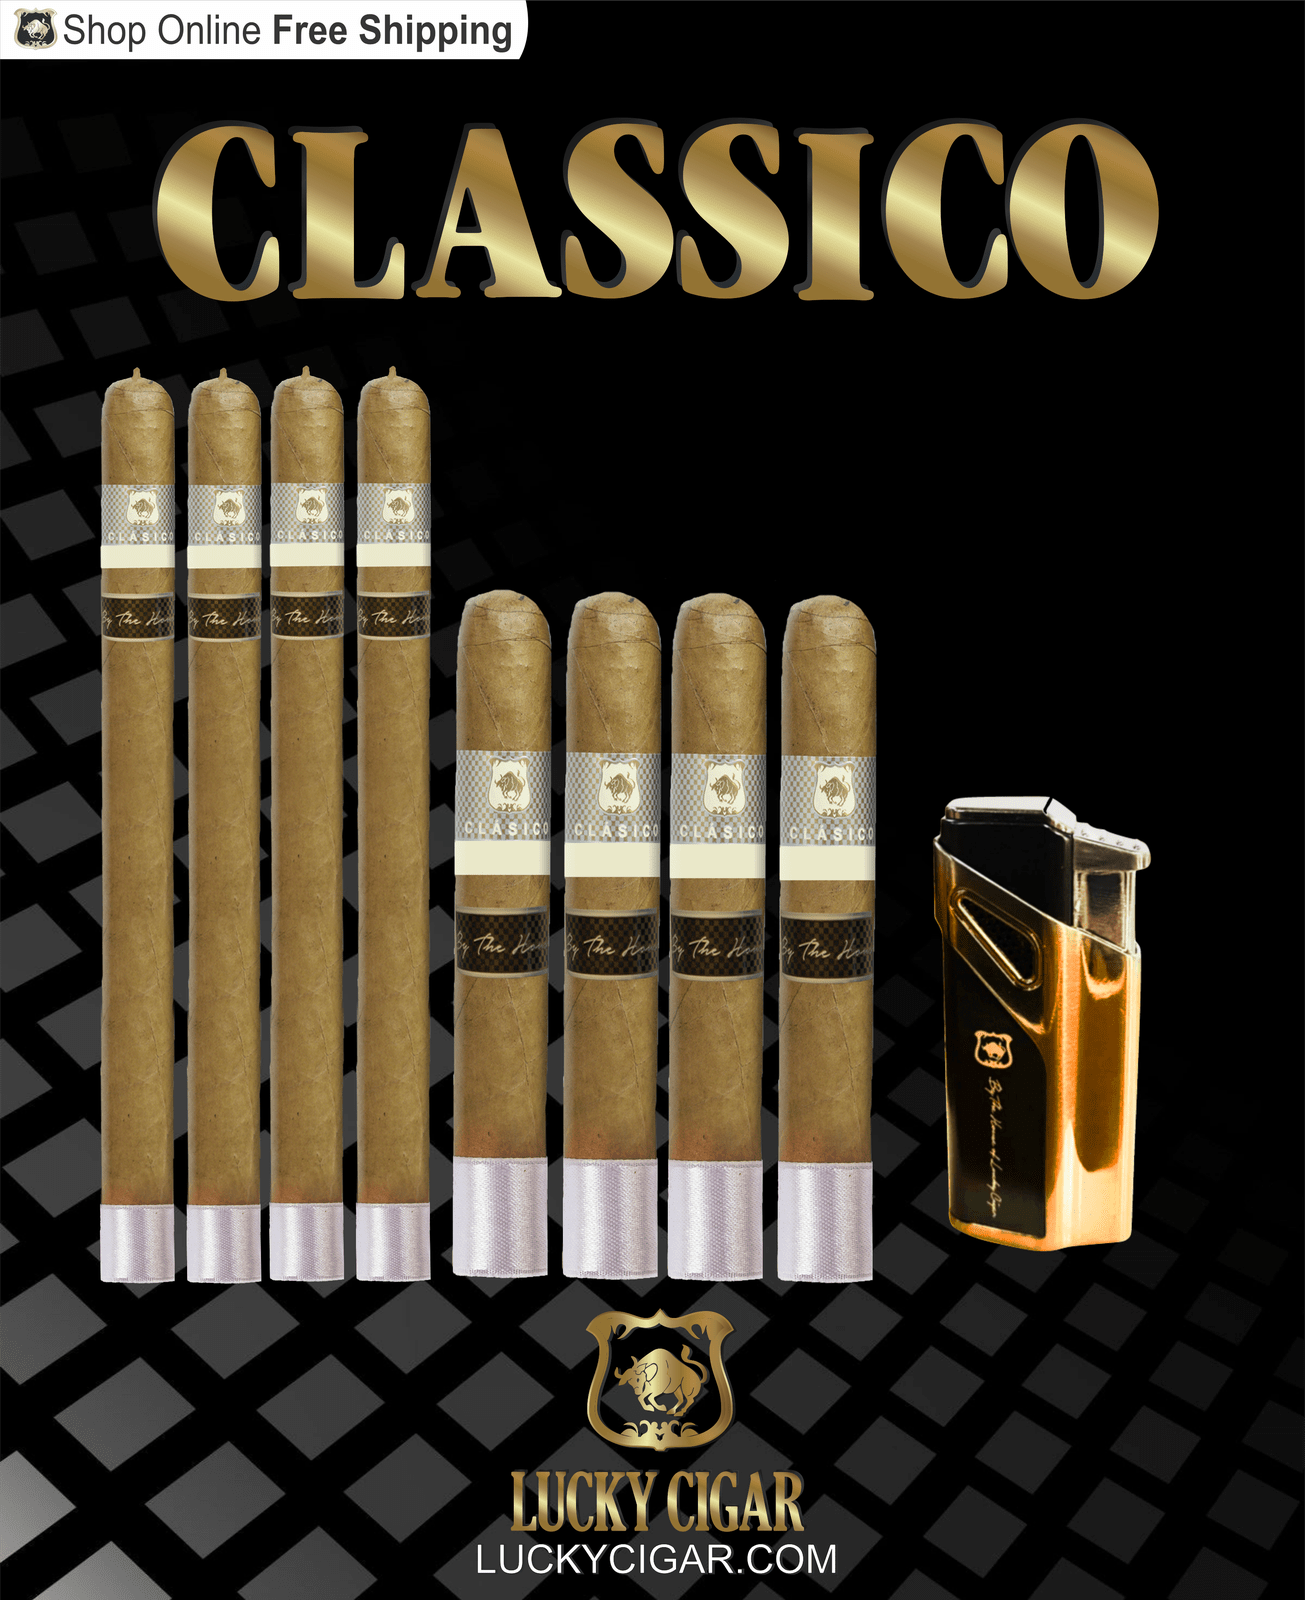 Lucky Cigar Sampler Sets: Set of 8 Classico Churchill, Robusto Cigars with Torch